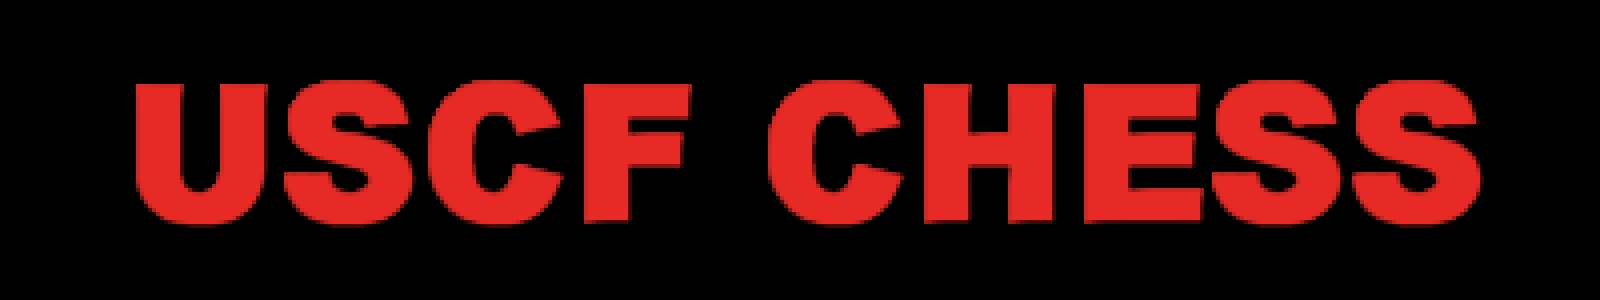 USCF Chess clearlogo